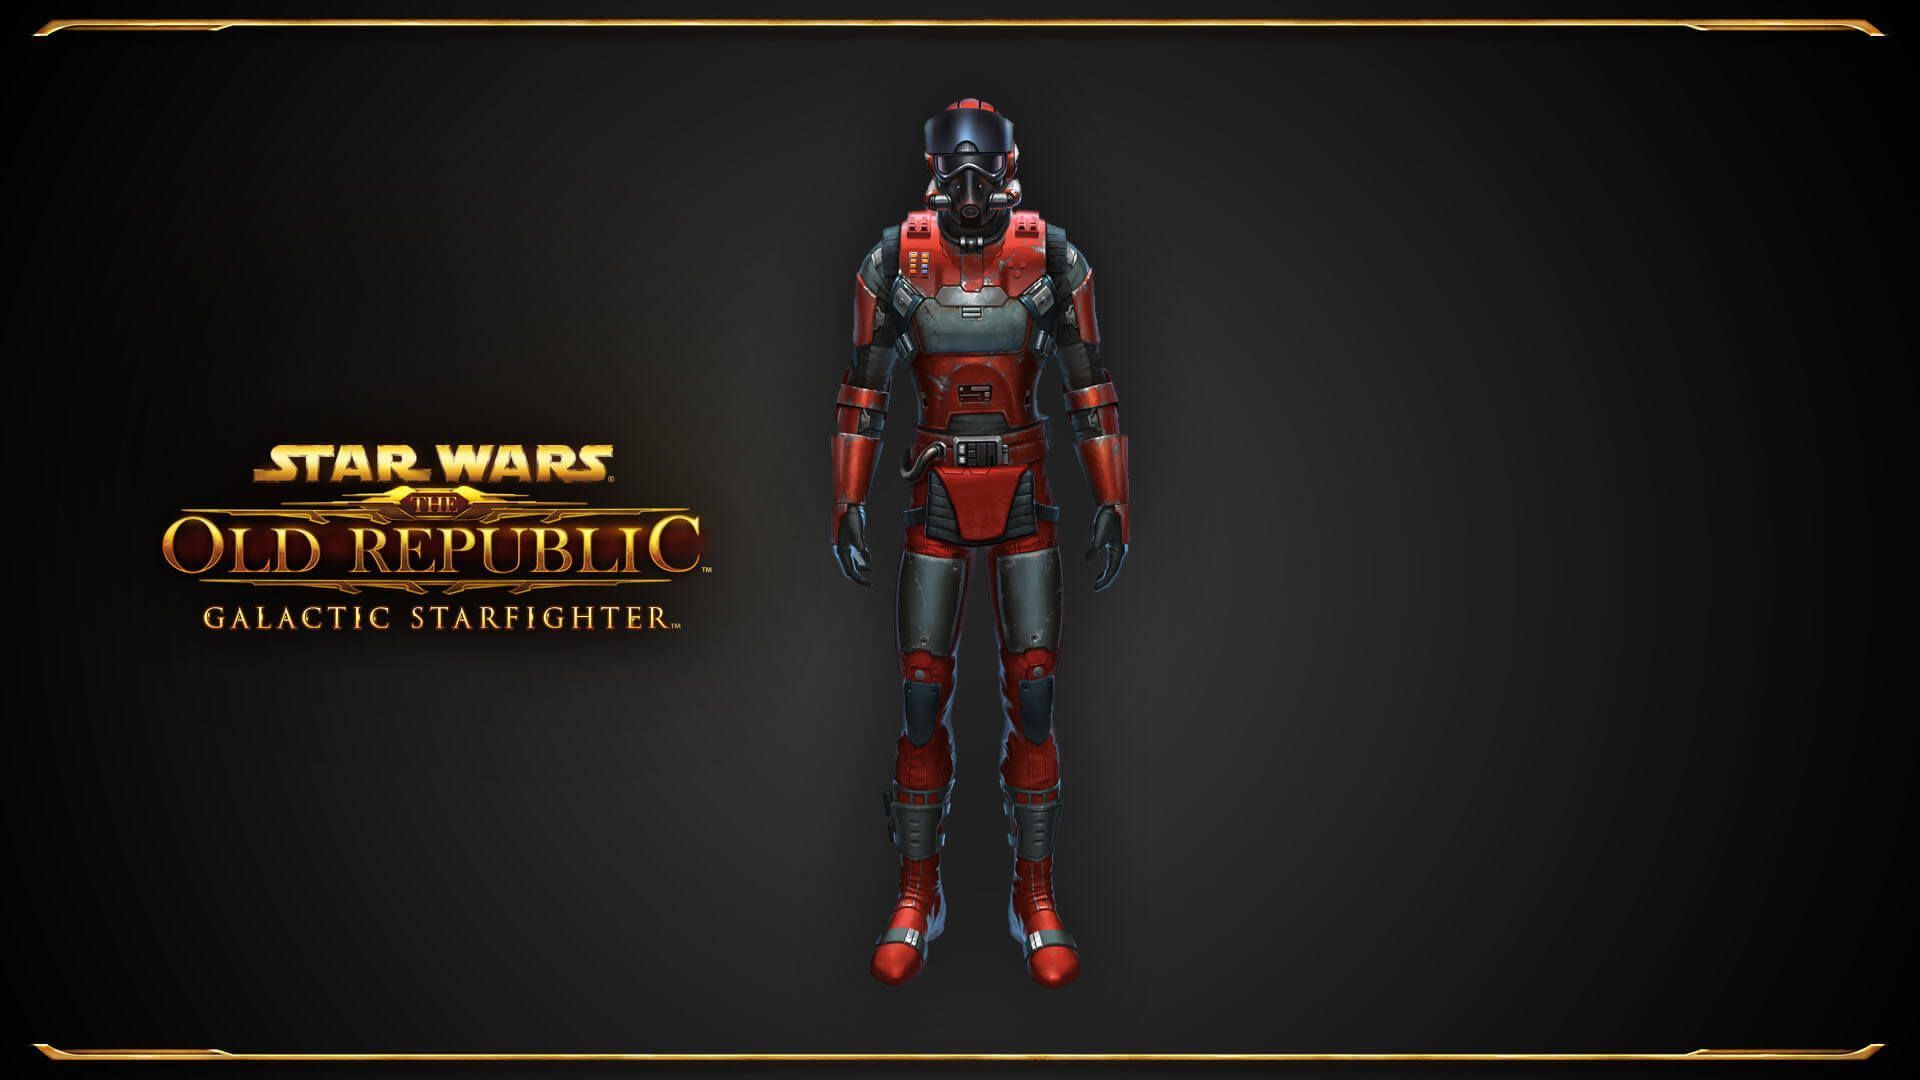 Sith Empire Fighter Pilot Ace. Sith empire, Starfighter, Star wars